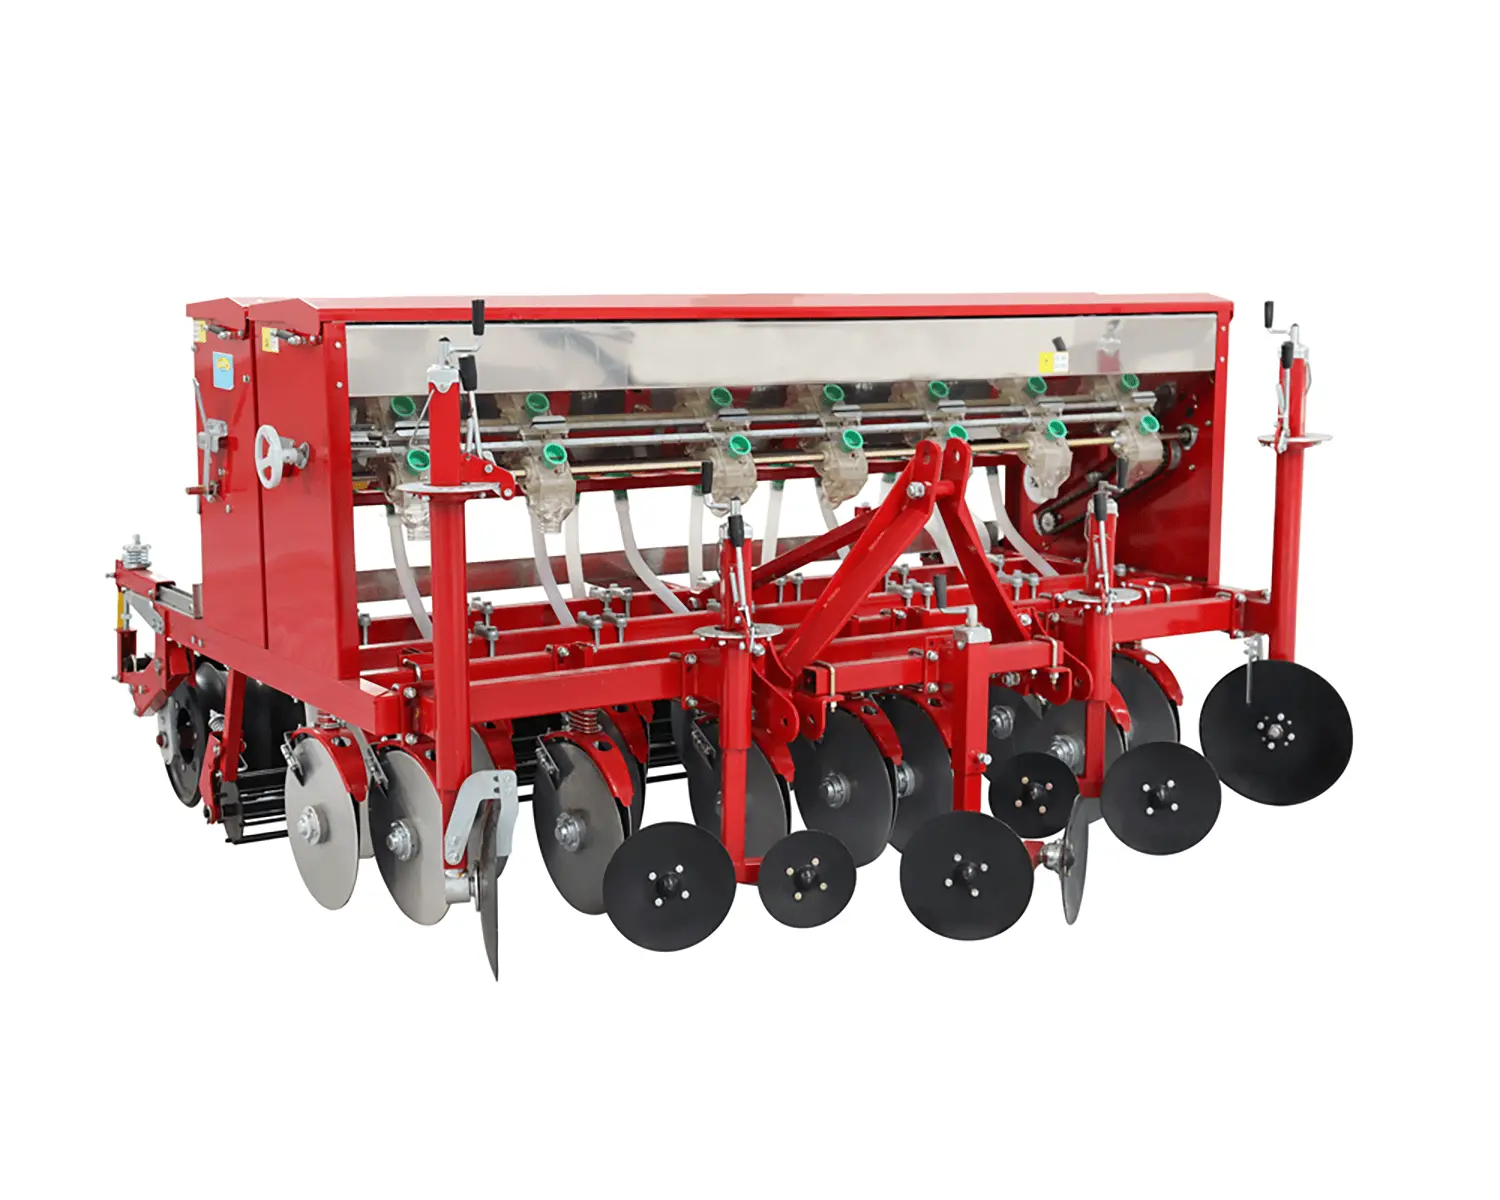 seed drill planter